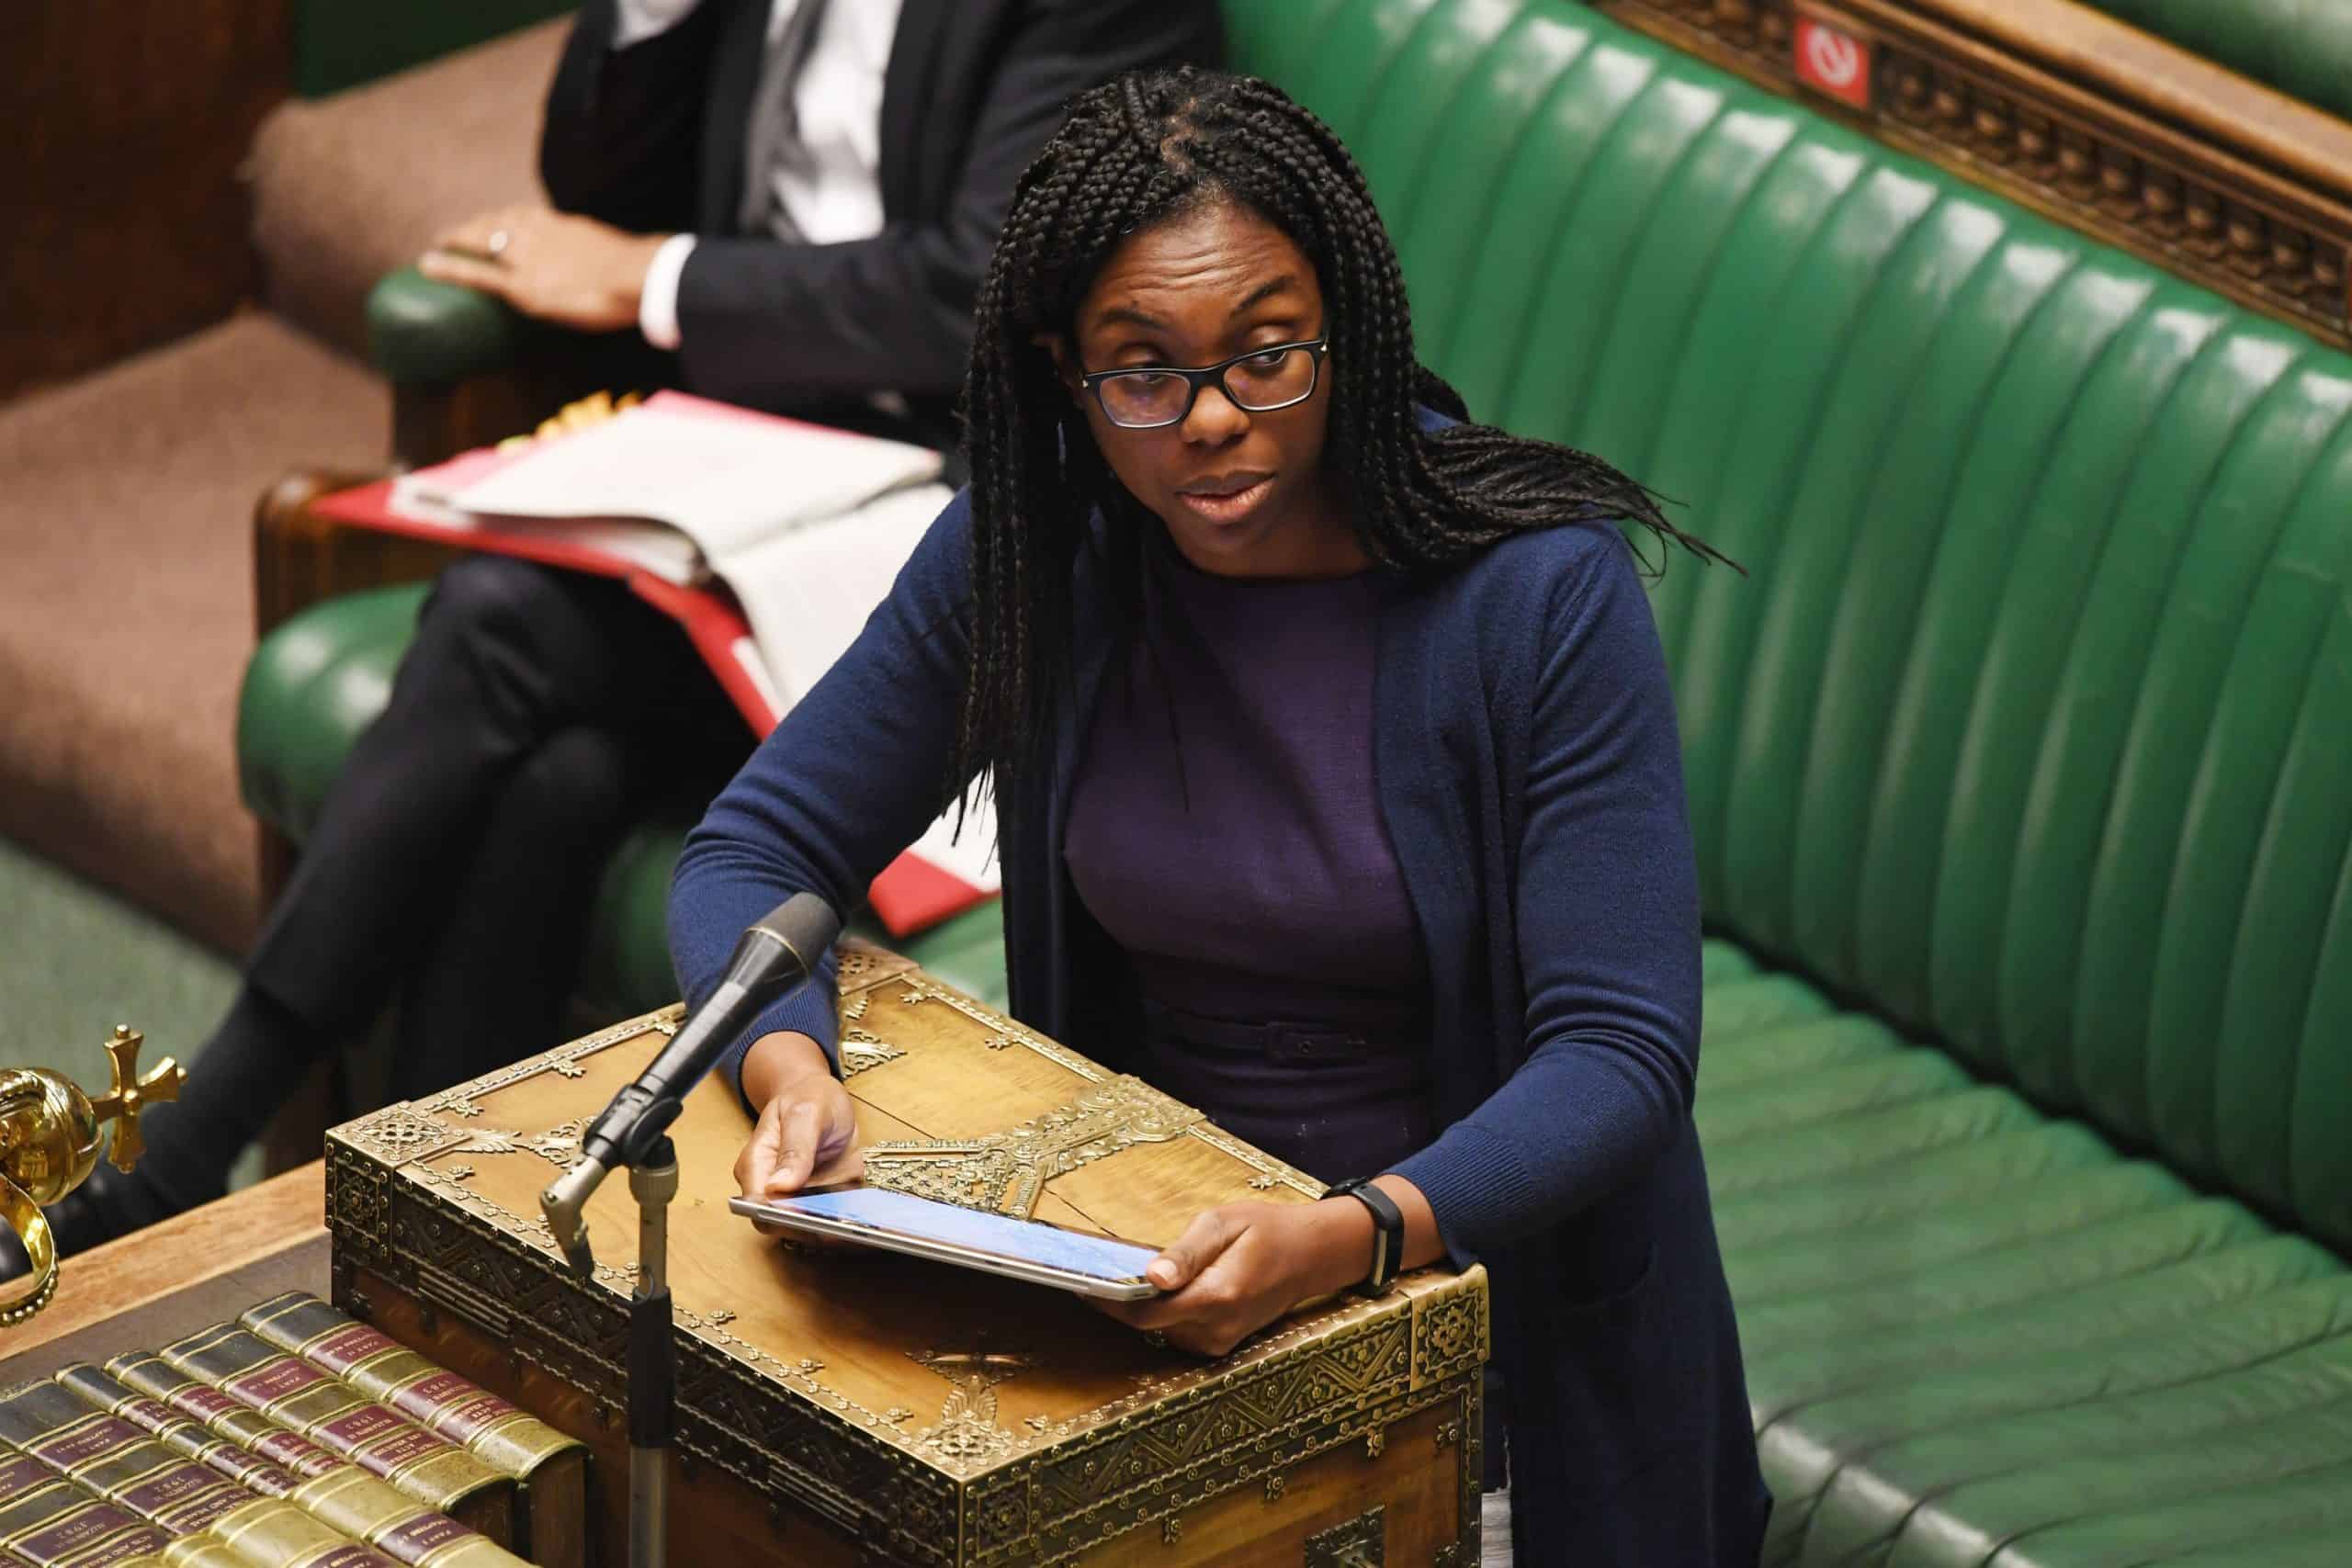 Equalities minister must apologise or be sacked, argues peer